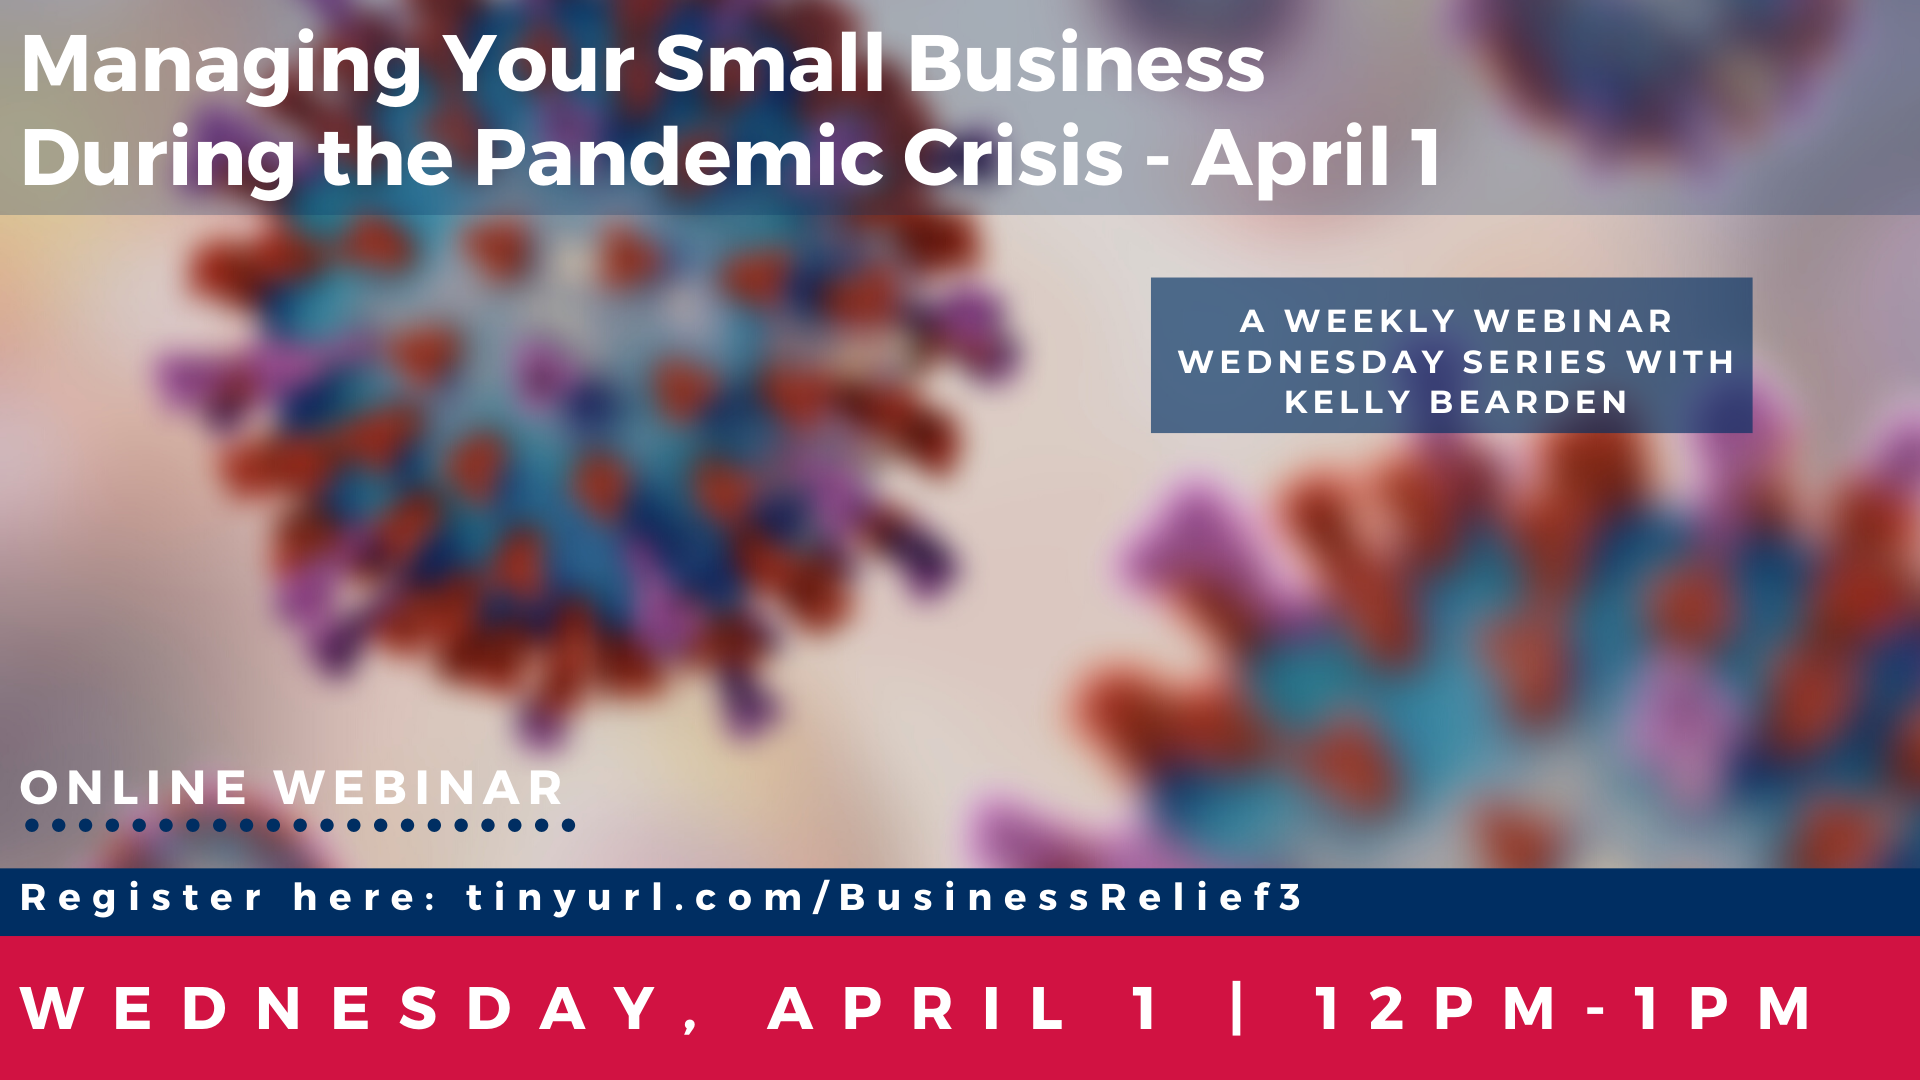 Managing Your Small Business during the Pandemic Crisis - April 1